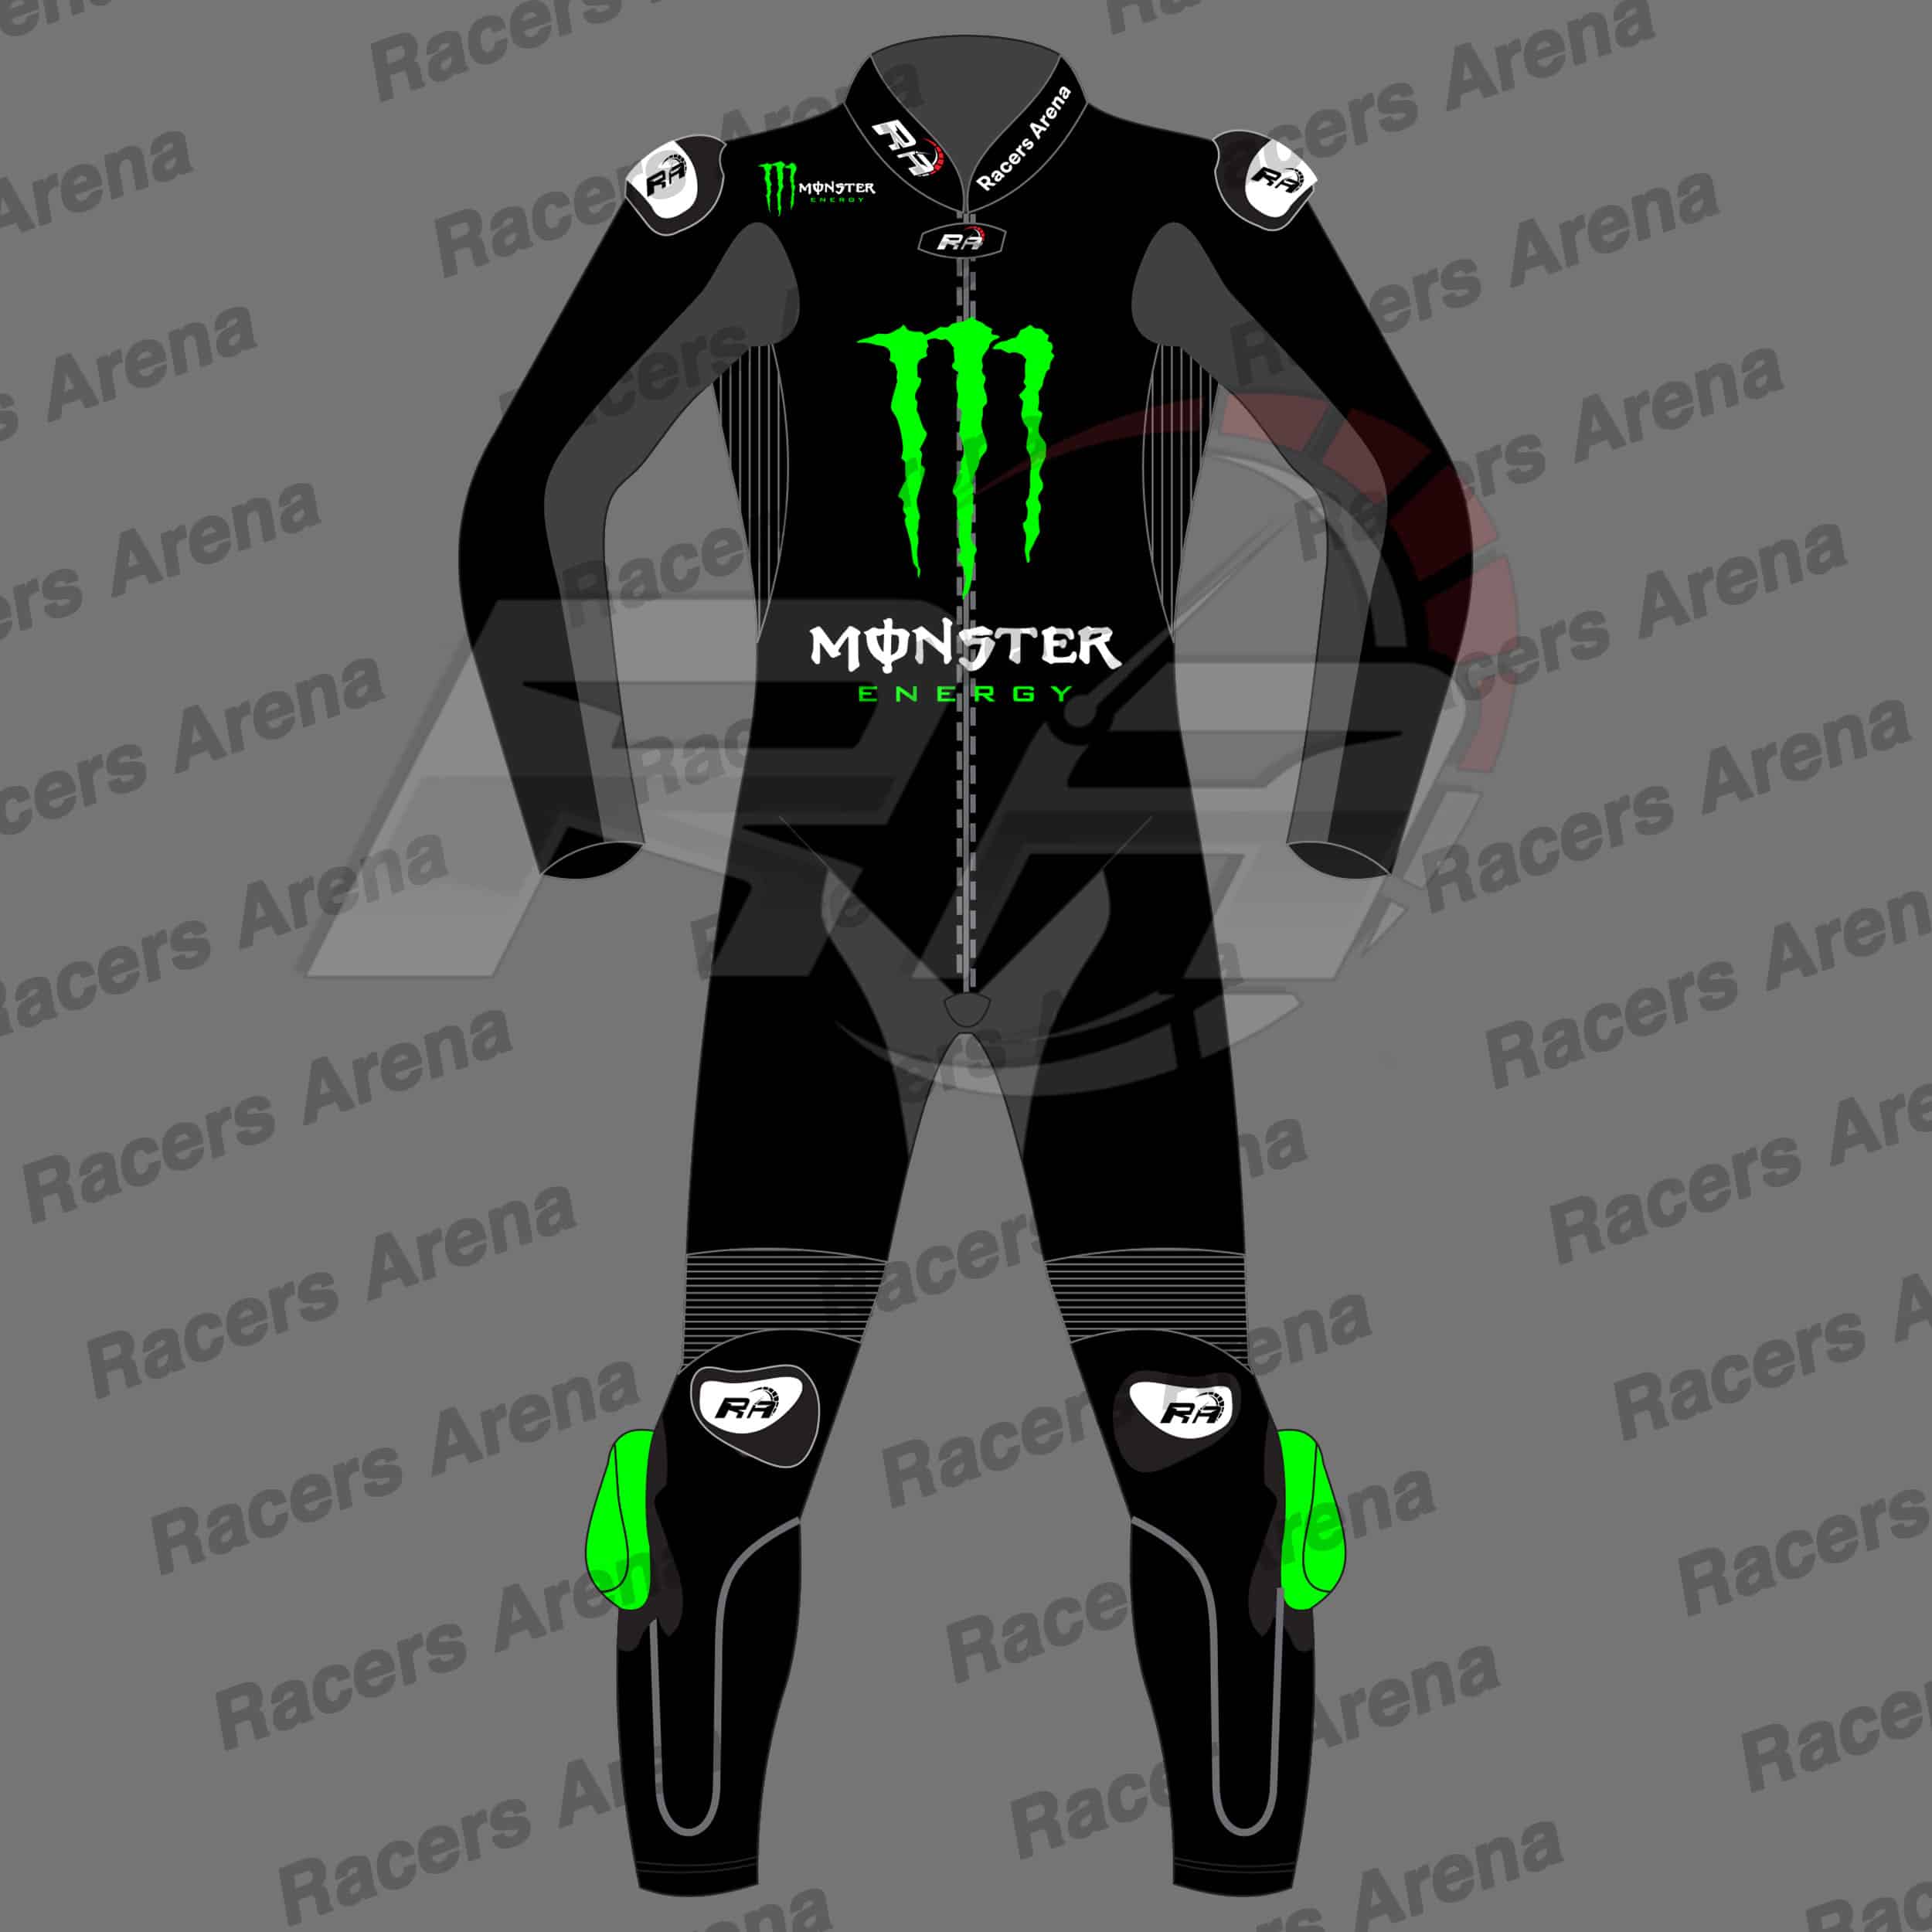 Monster Energy Leather Race Suit - Racers Arena UK